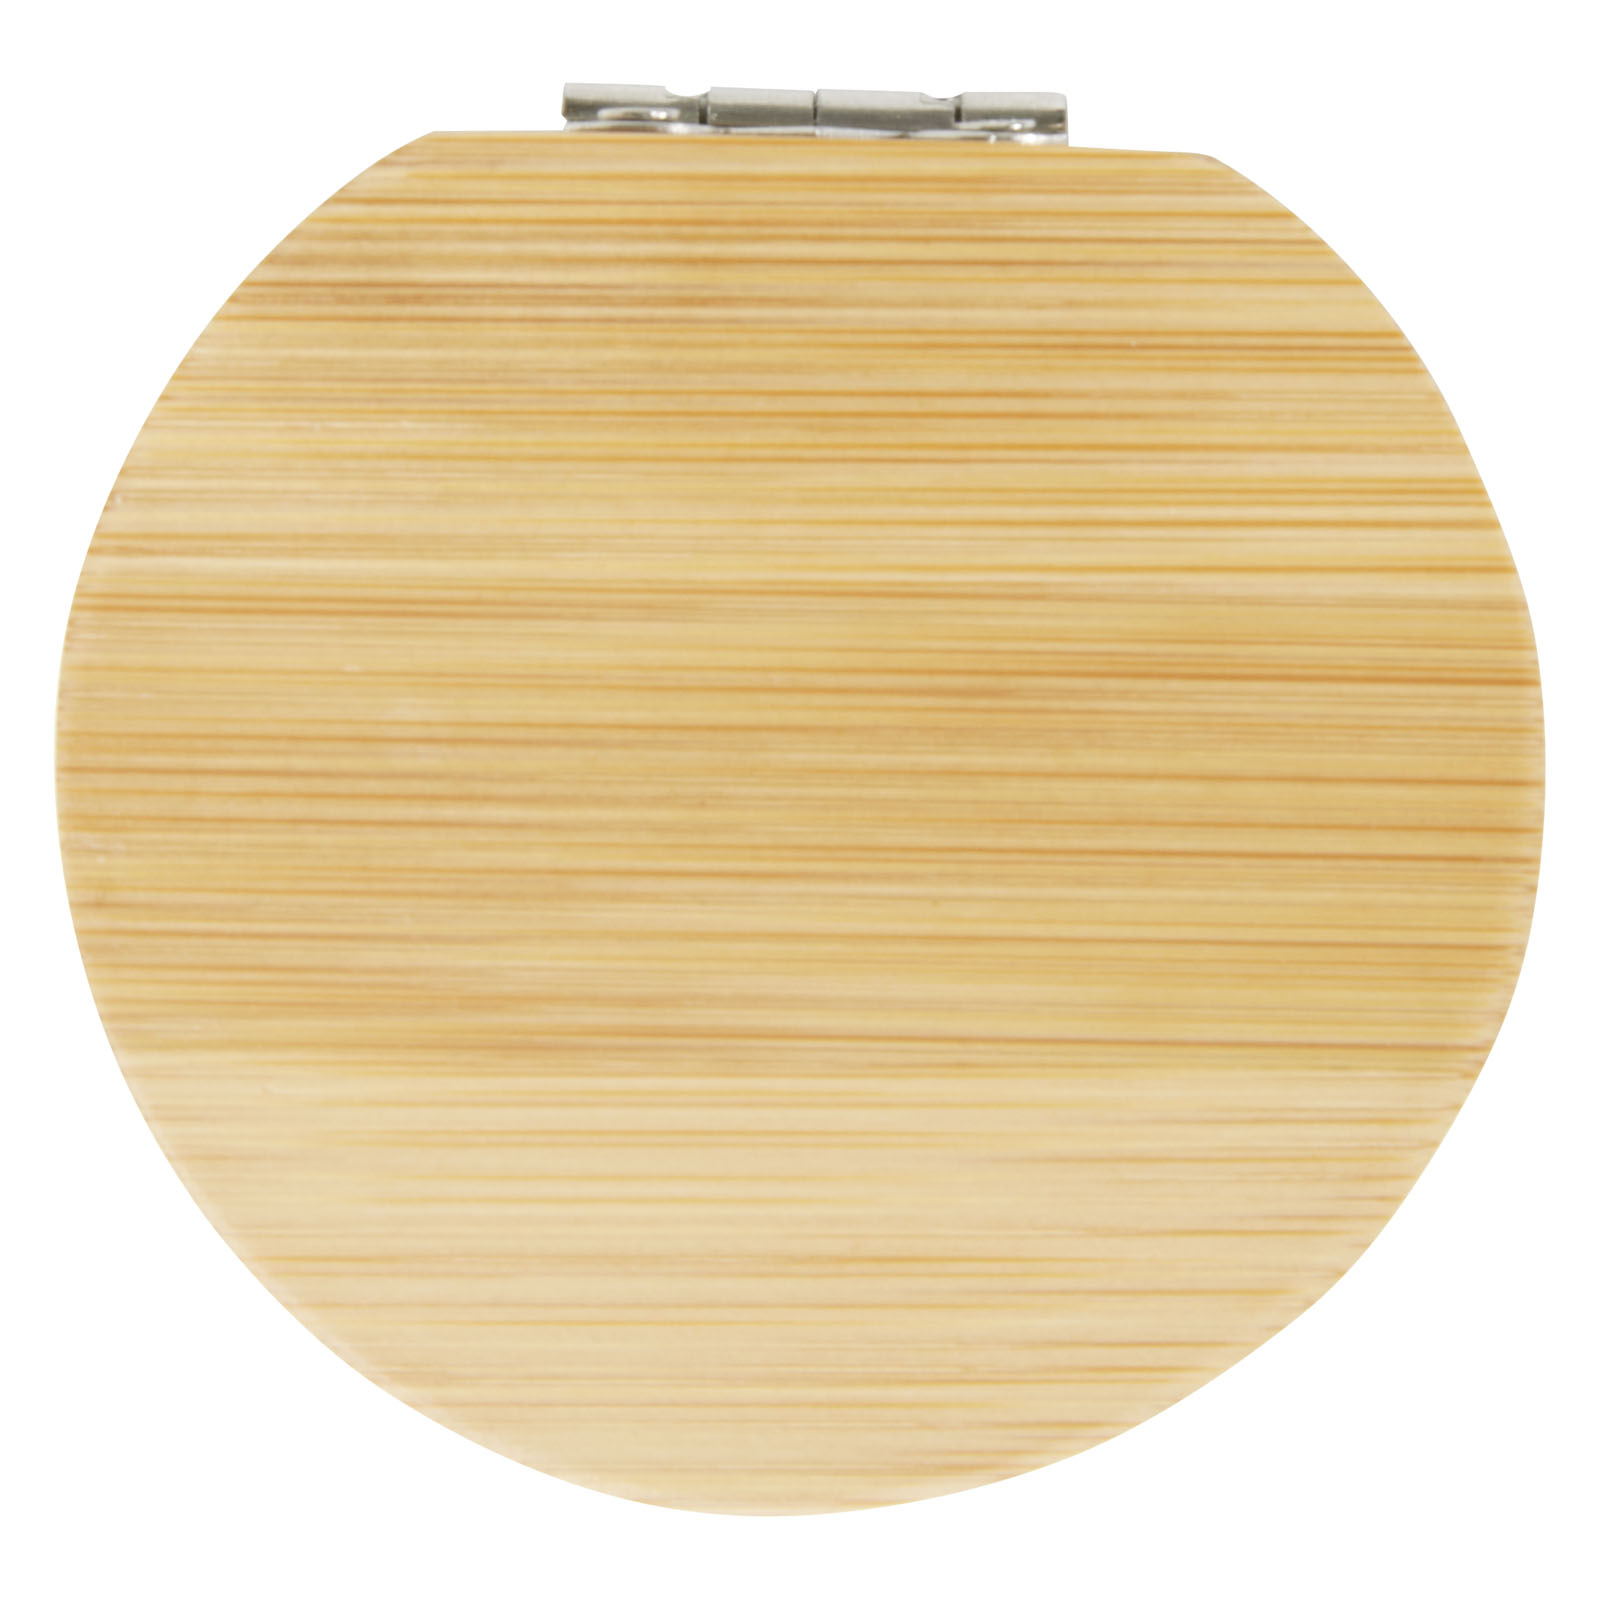 Advertising Personal Care - Afrodit bamboo pocket mirror - 1